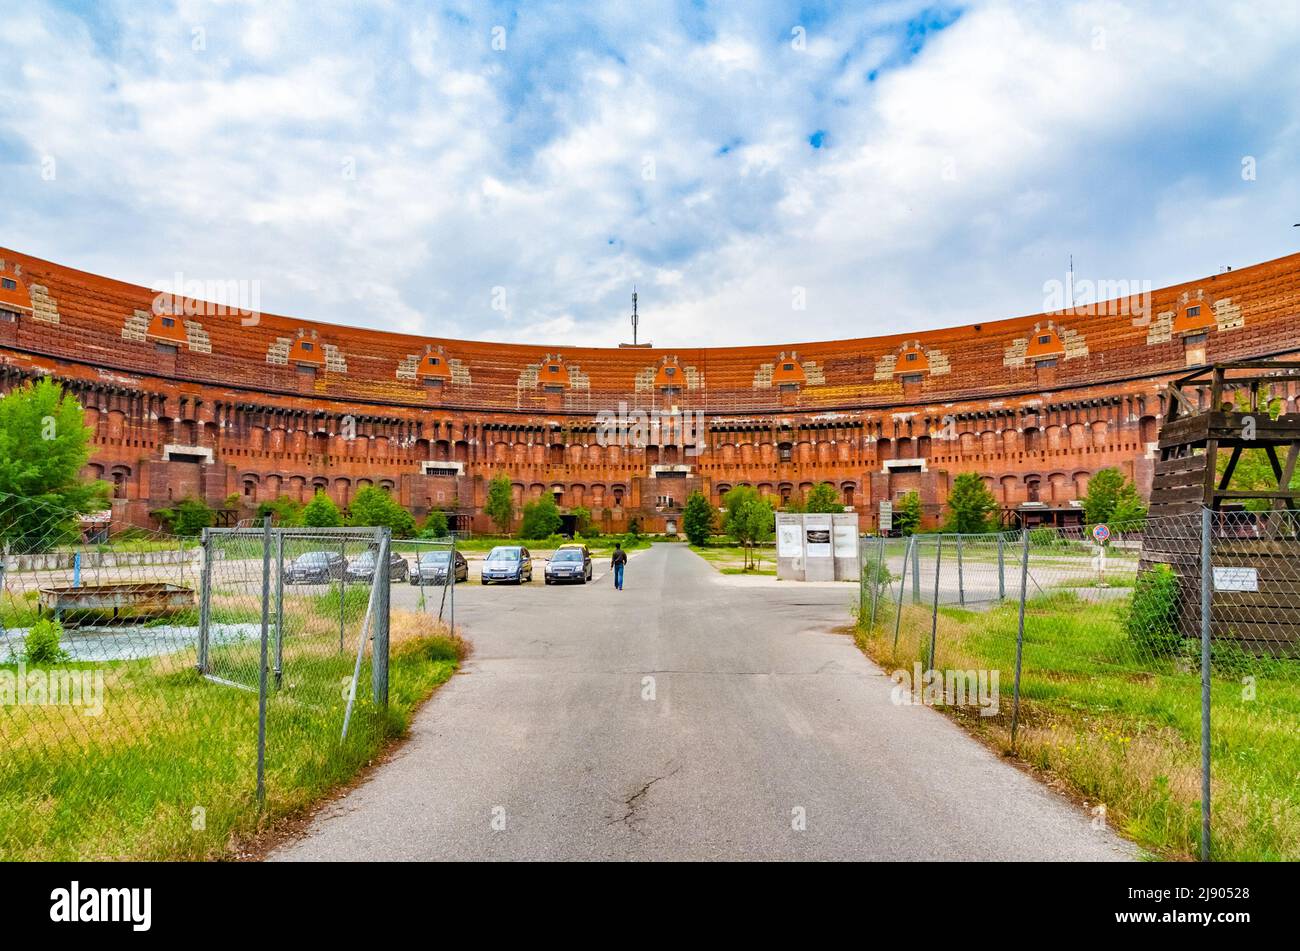 Panoramic view of the unfinished remains of the Congress Hall of the former Nazi party rallies in Nürnberg, Germany. The building is mostly built out... Stock Photo